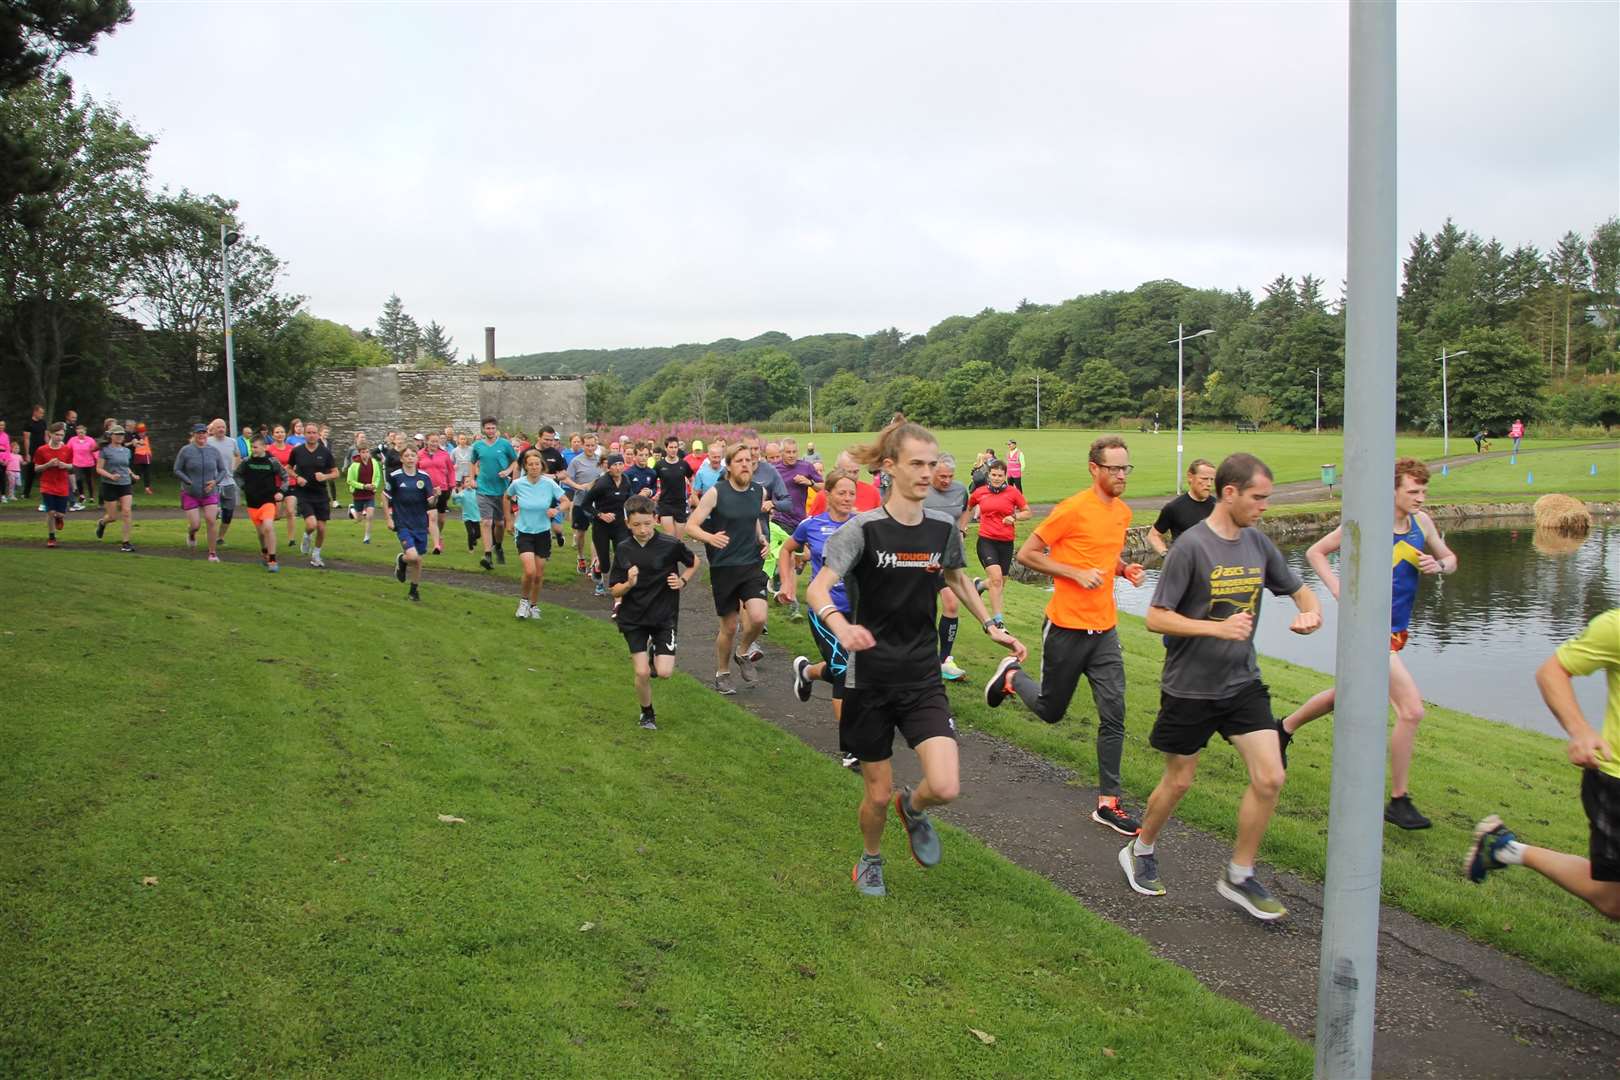 Thurso parkrun takes place every Saturday at the boating pond.